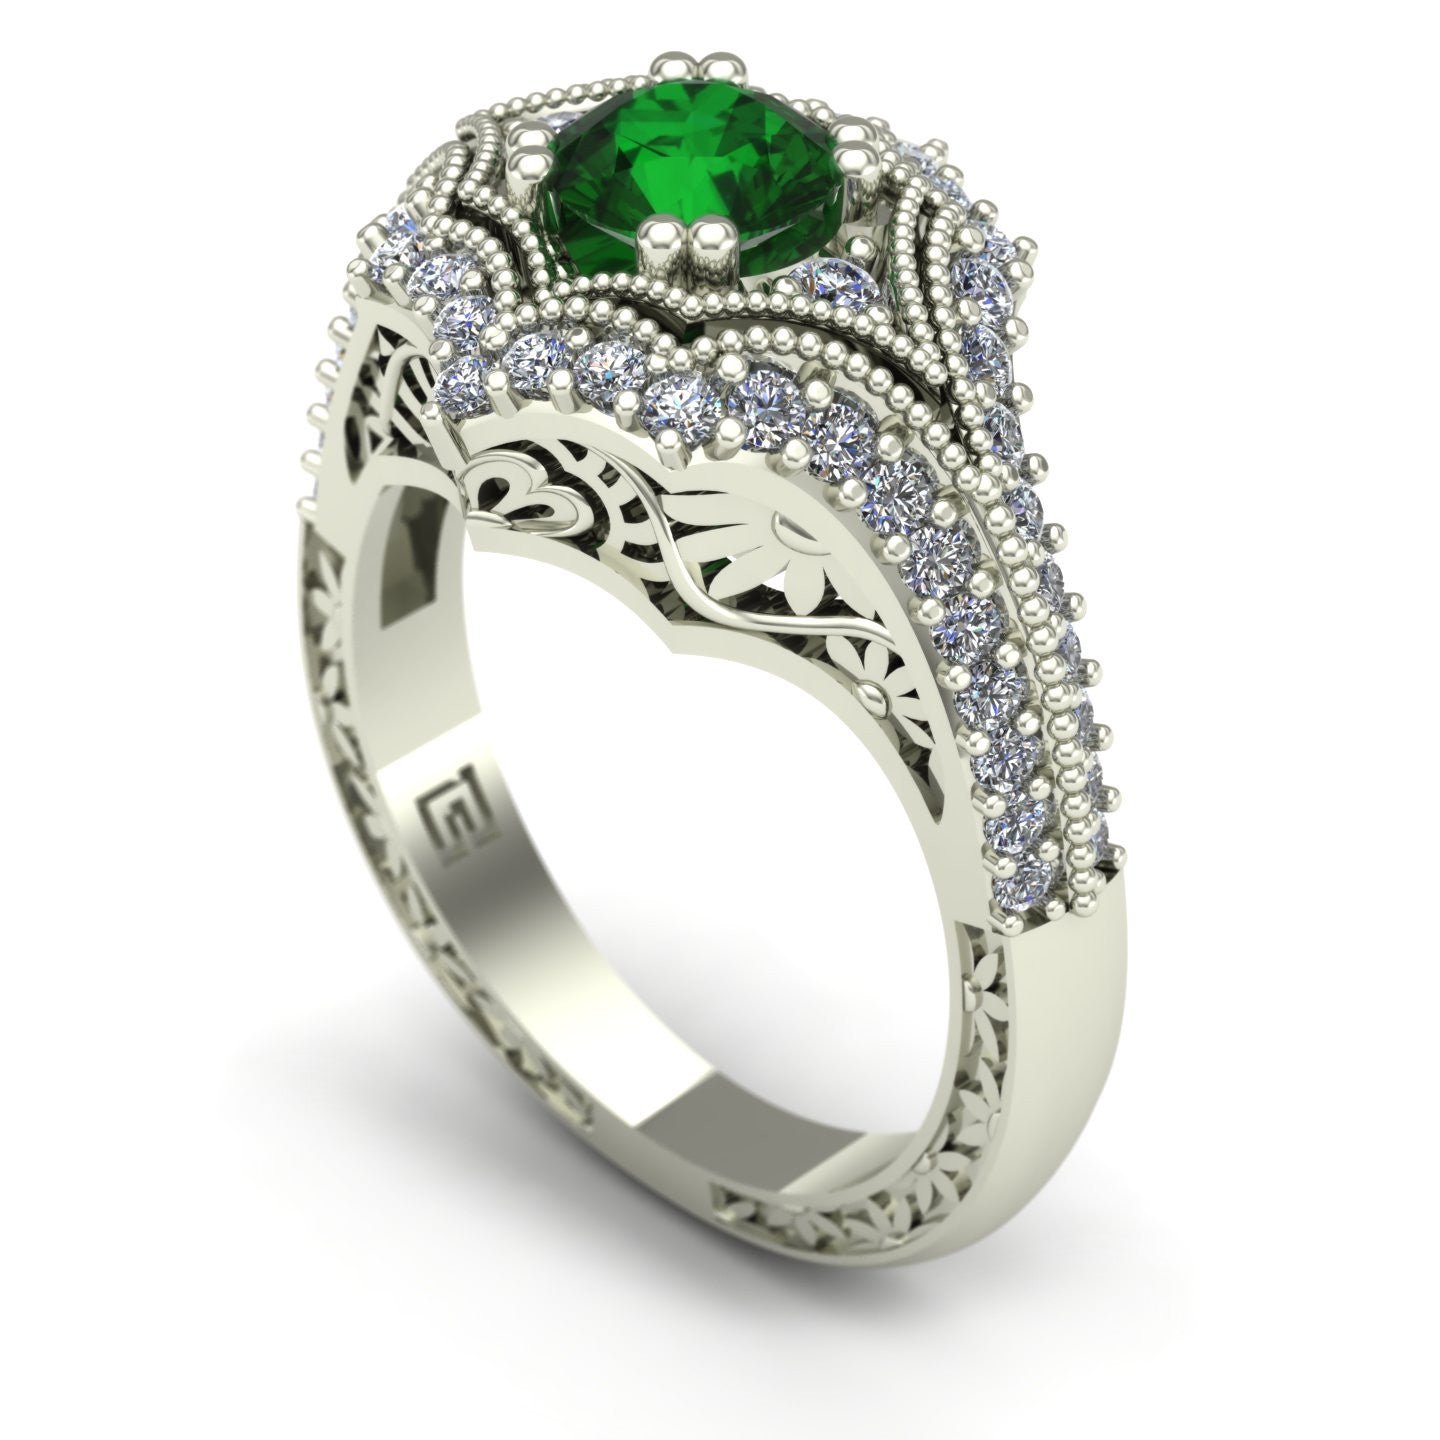 Emerald and diamond ring with floral carving in 14k white gold - Charles Babb Designs